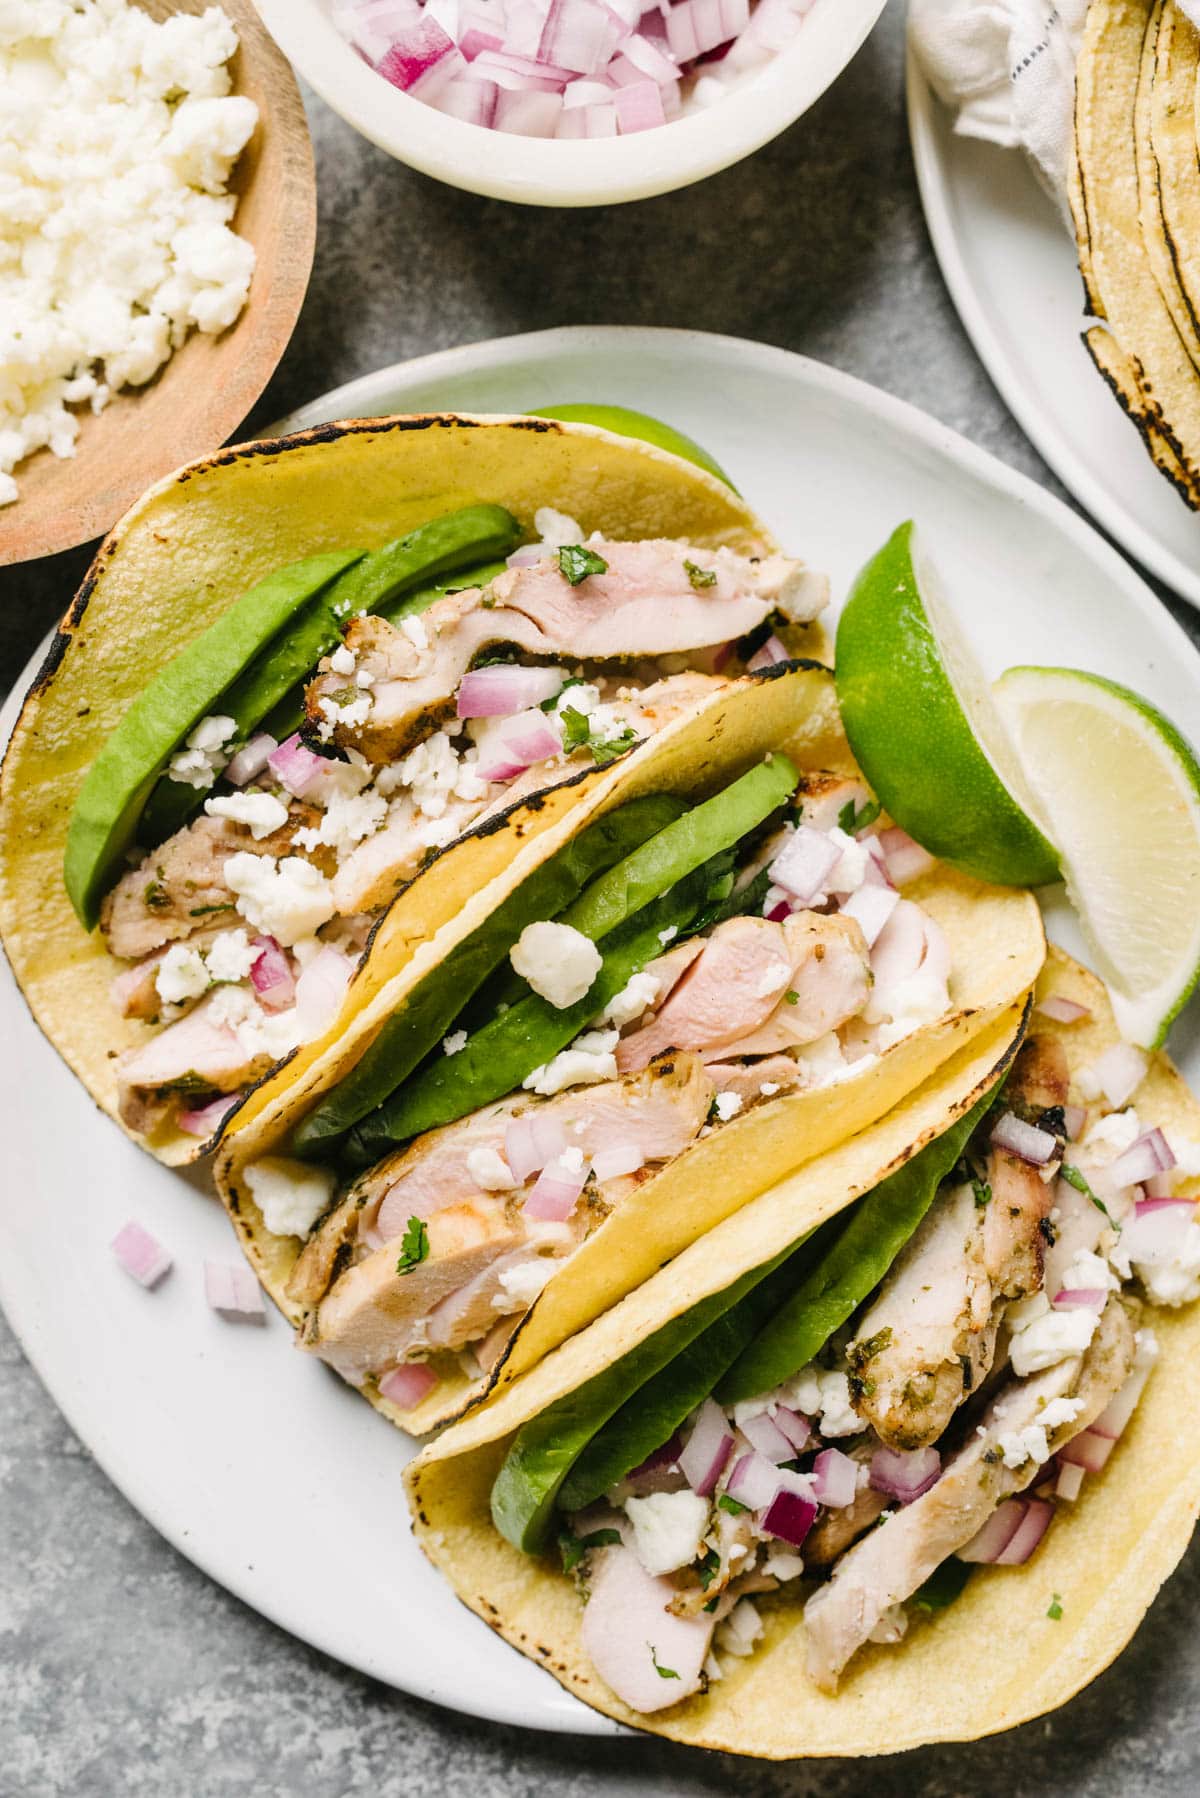 Three cilantro lime chicken tacos on a plate with garnishes; the plate is surrounded by bowls of red onions, cojita cheese, and corn tortillas.